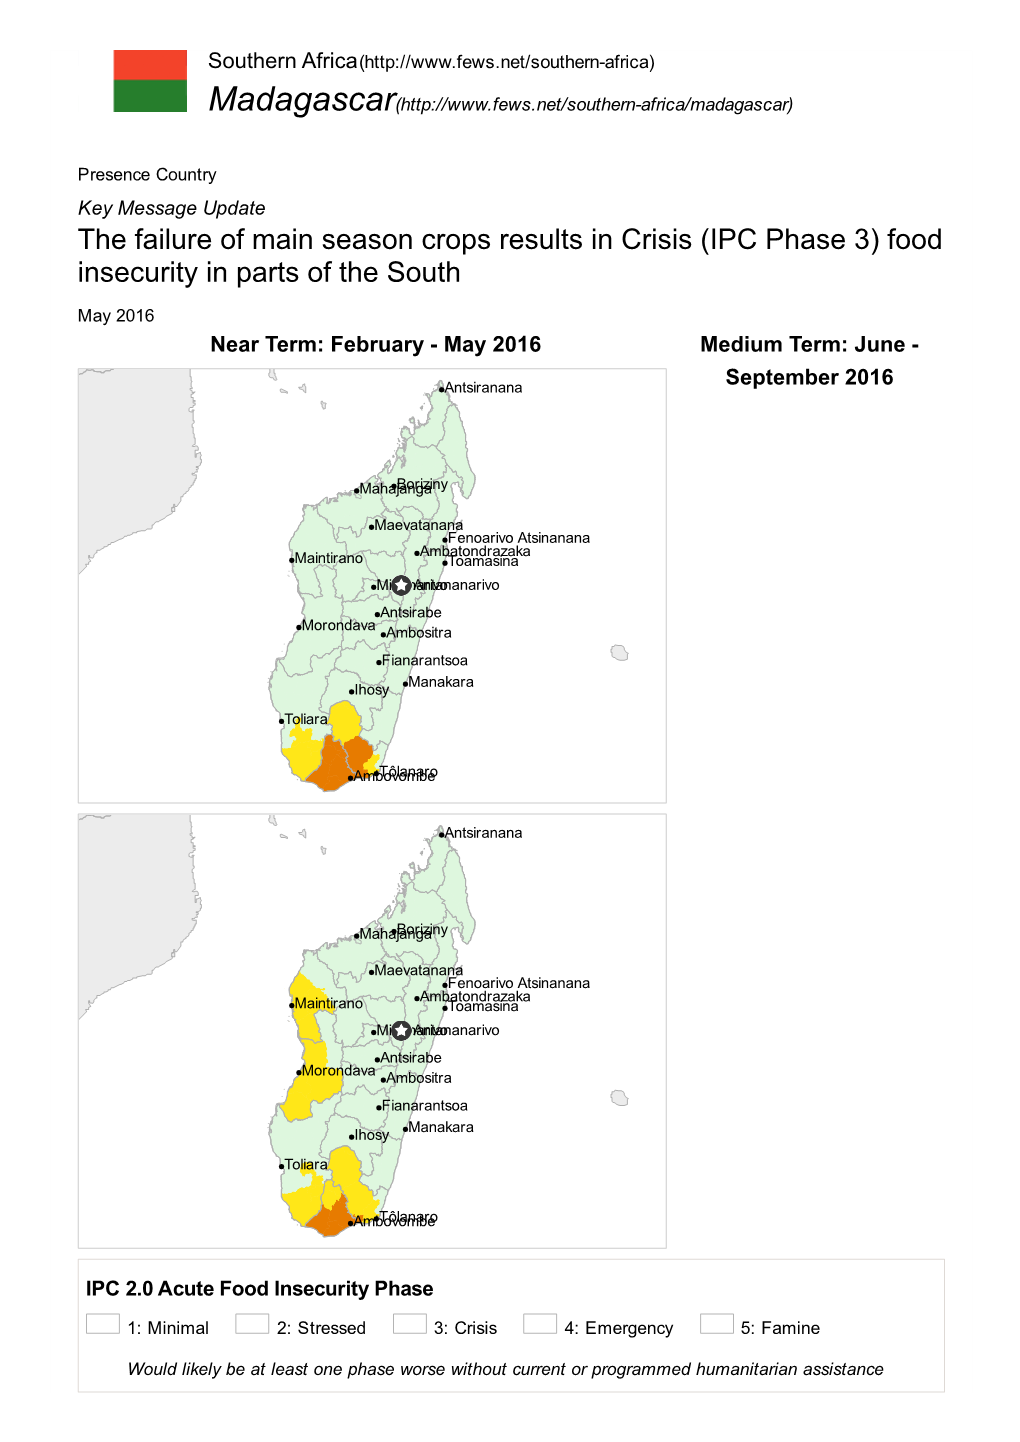 (IPC Phase 3) Food Insecurity in Parts of the South